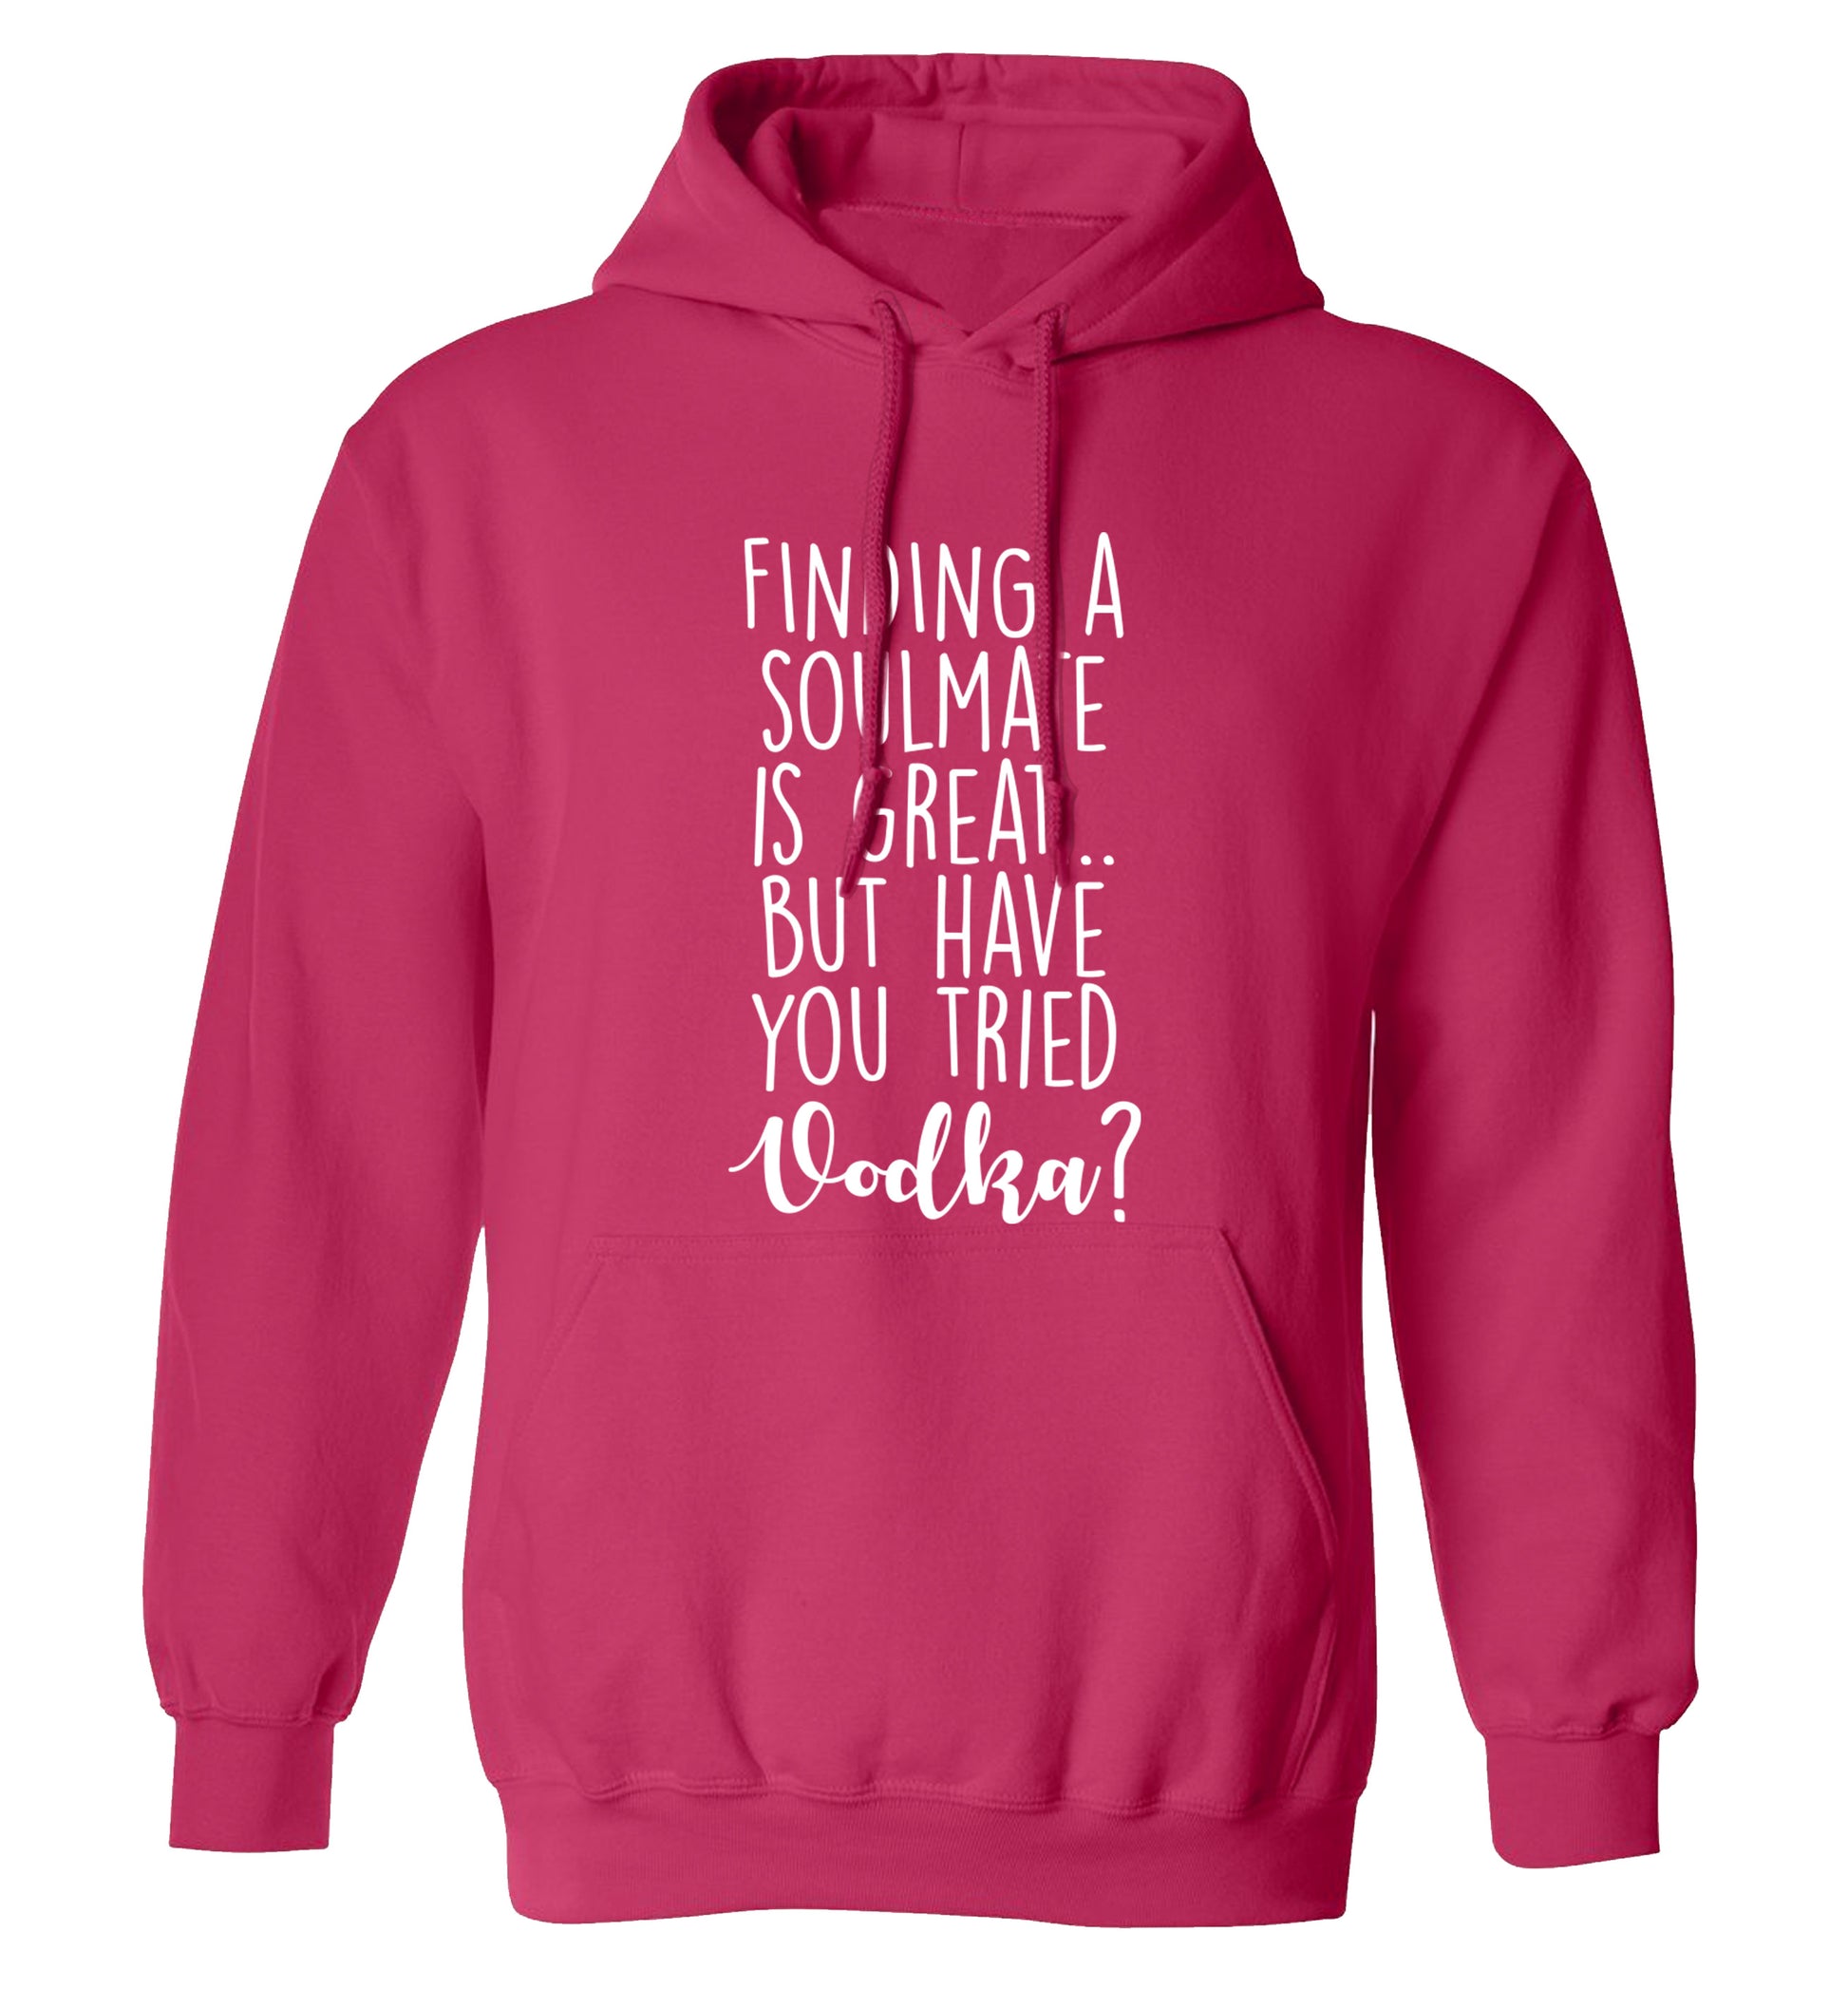 Finding a soulmate is great but have you tried vodka? adults unisex pink hoodie 2XL